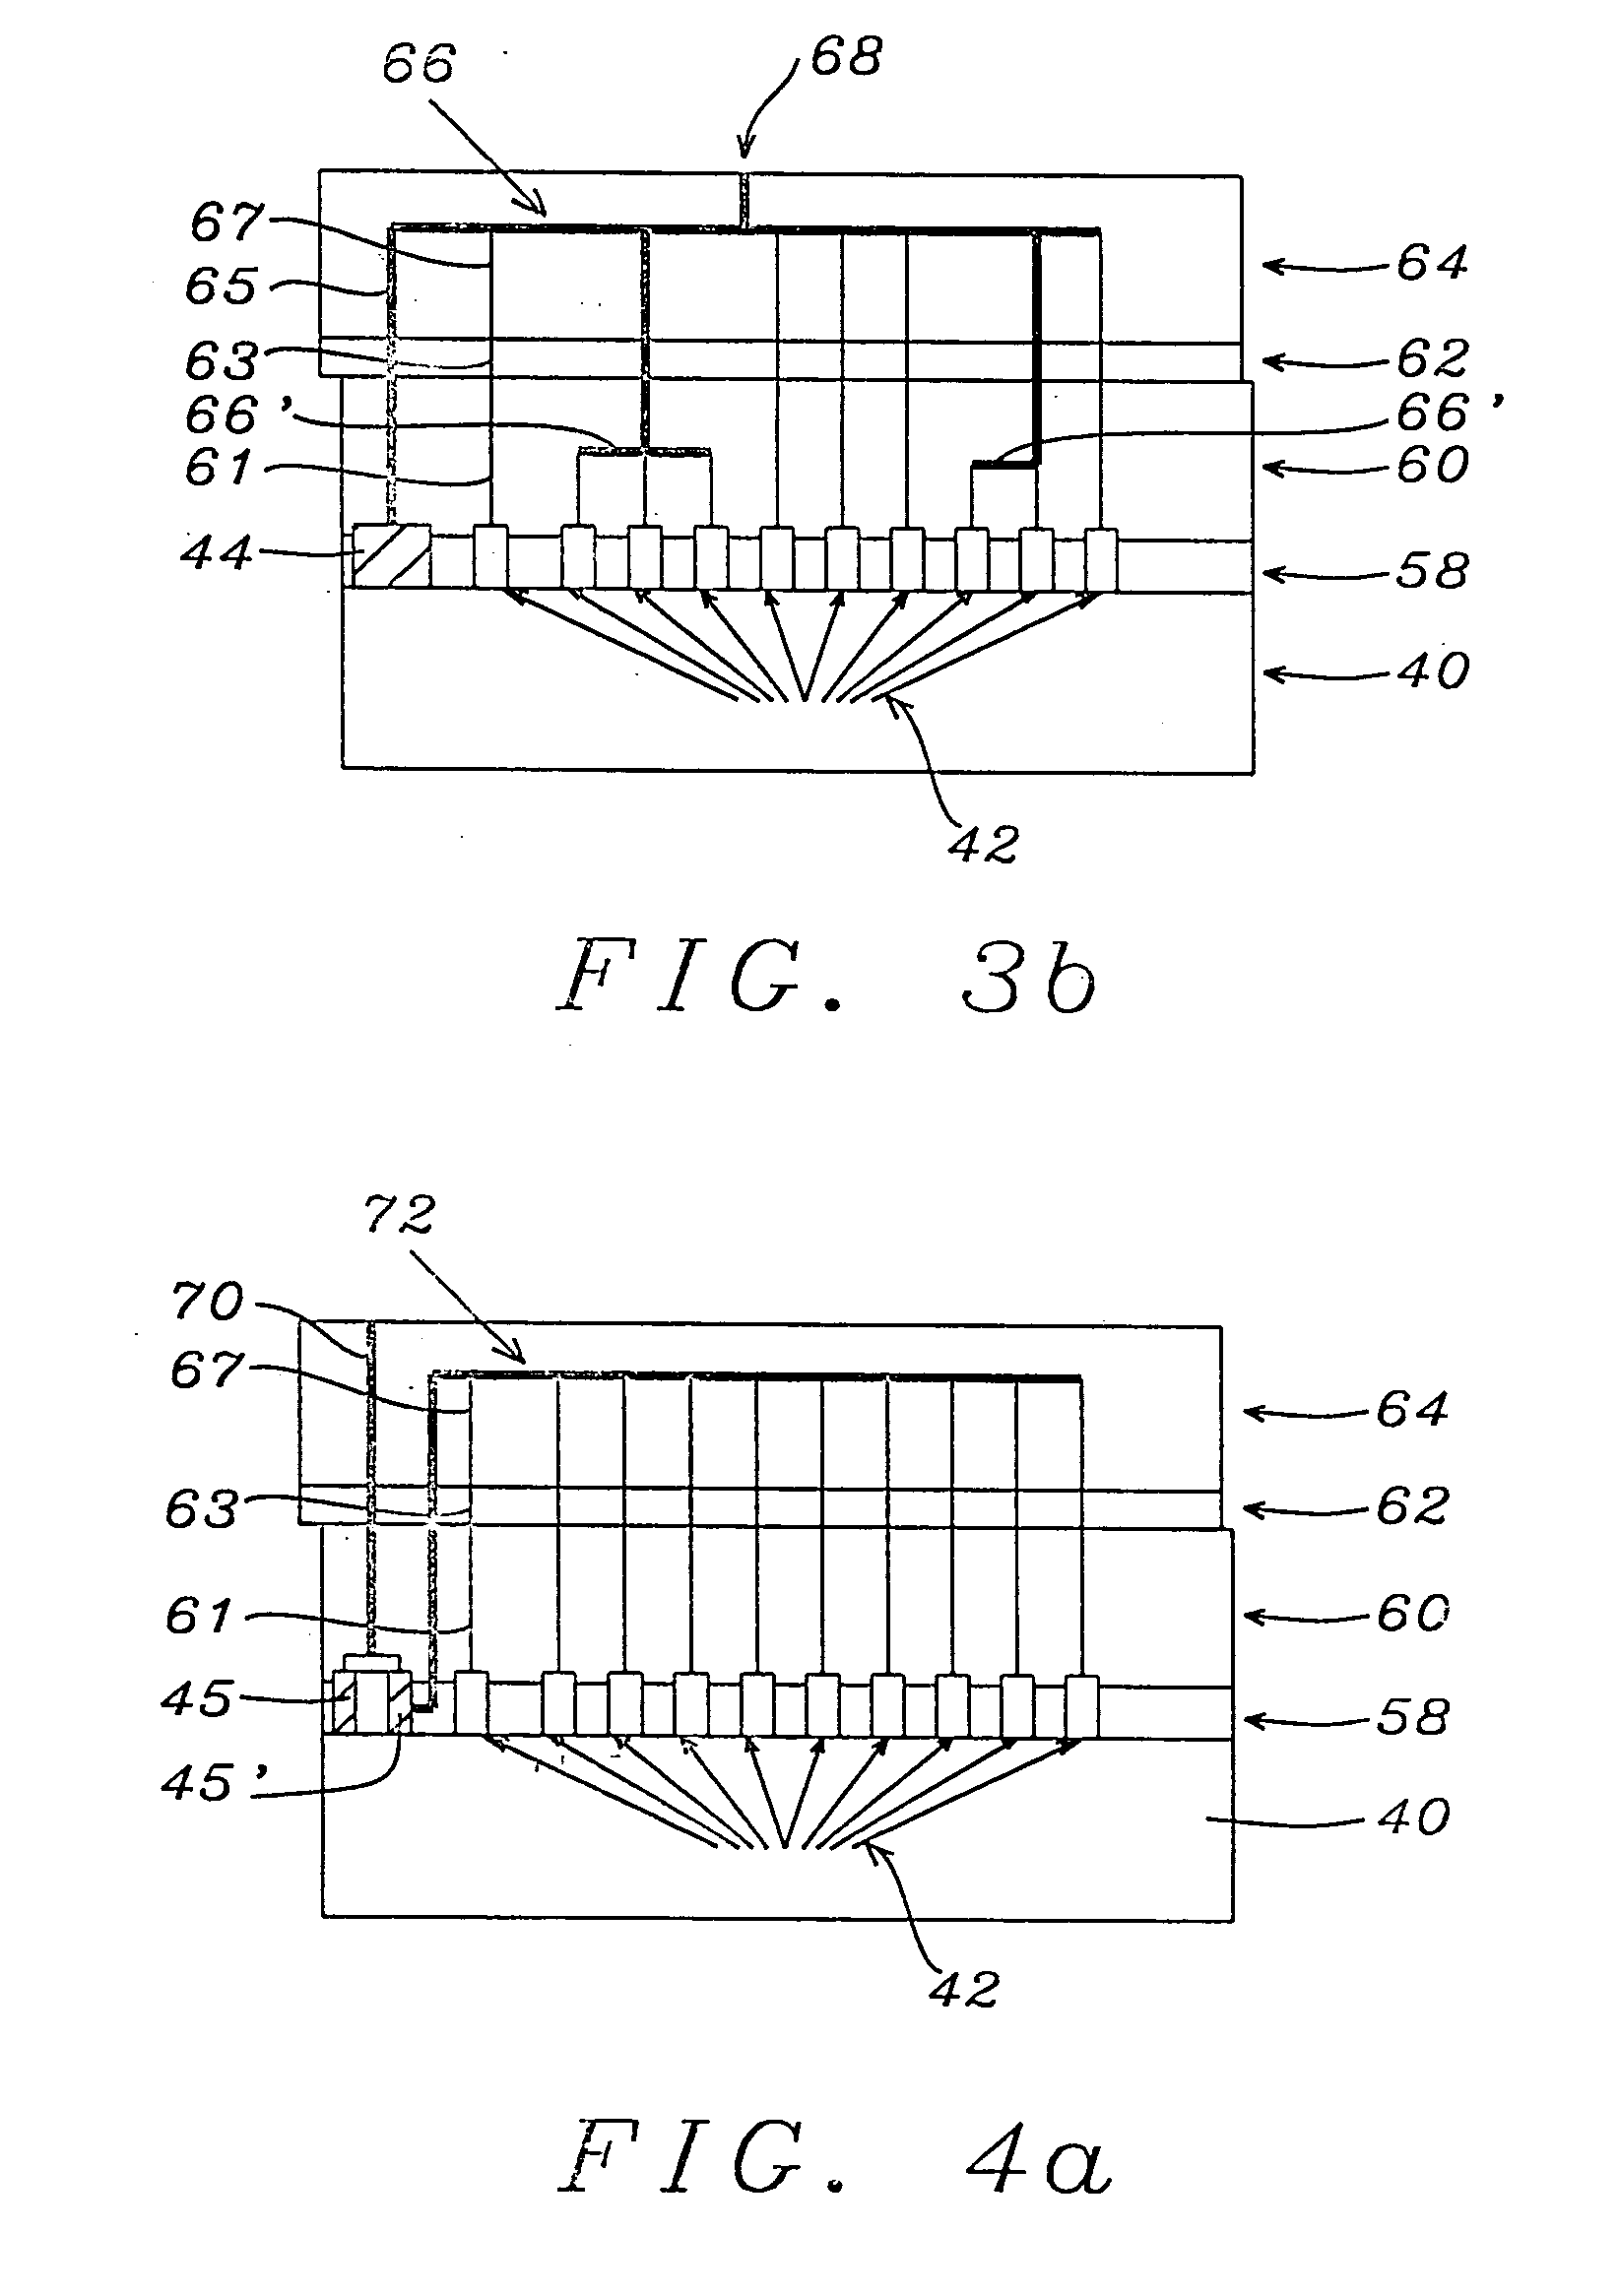 Post passivation interconnection schemes on top of the IC chips